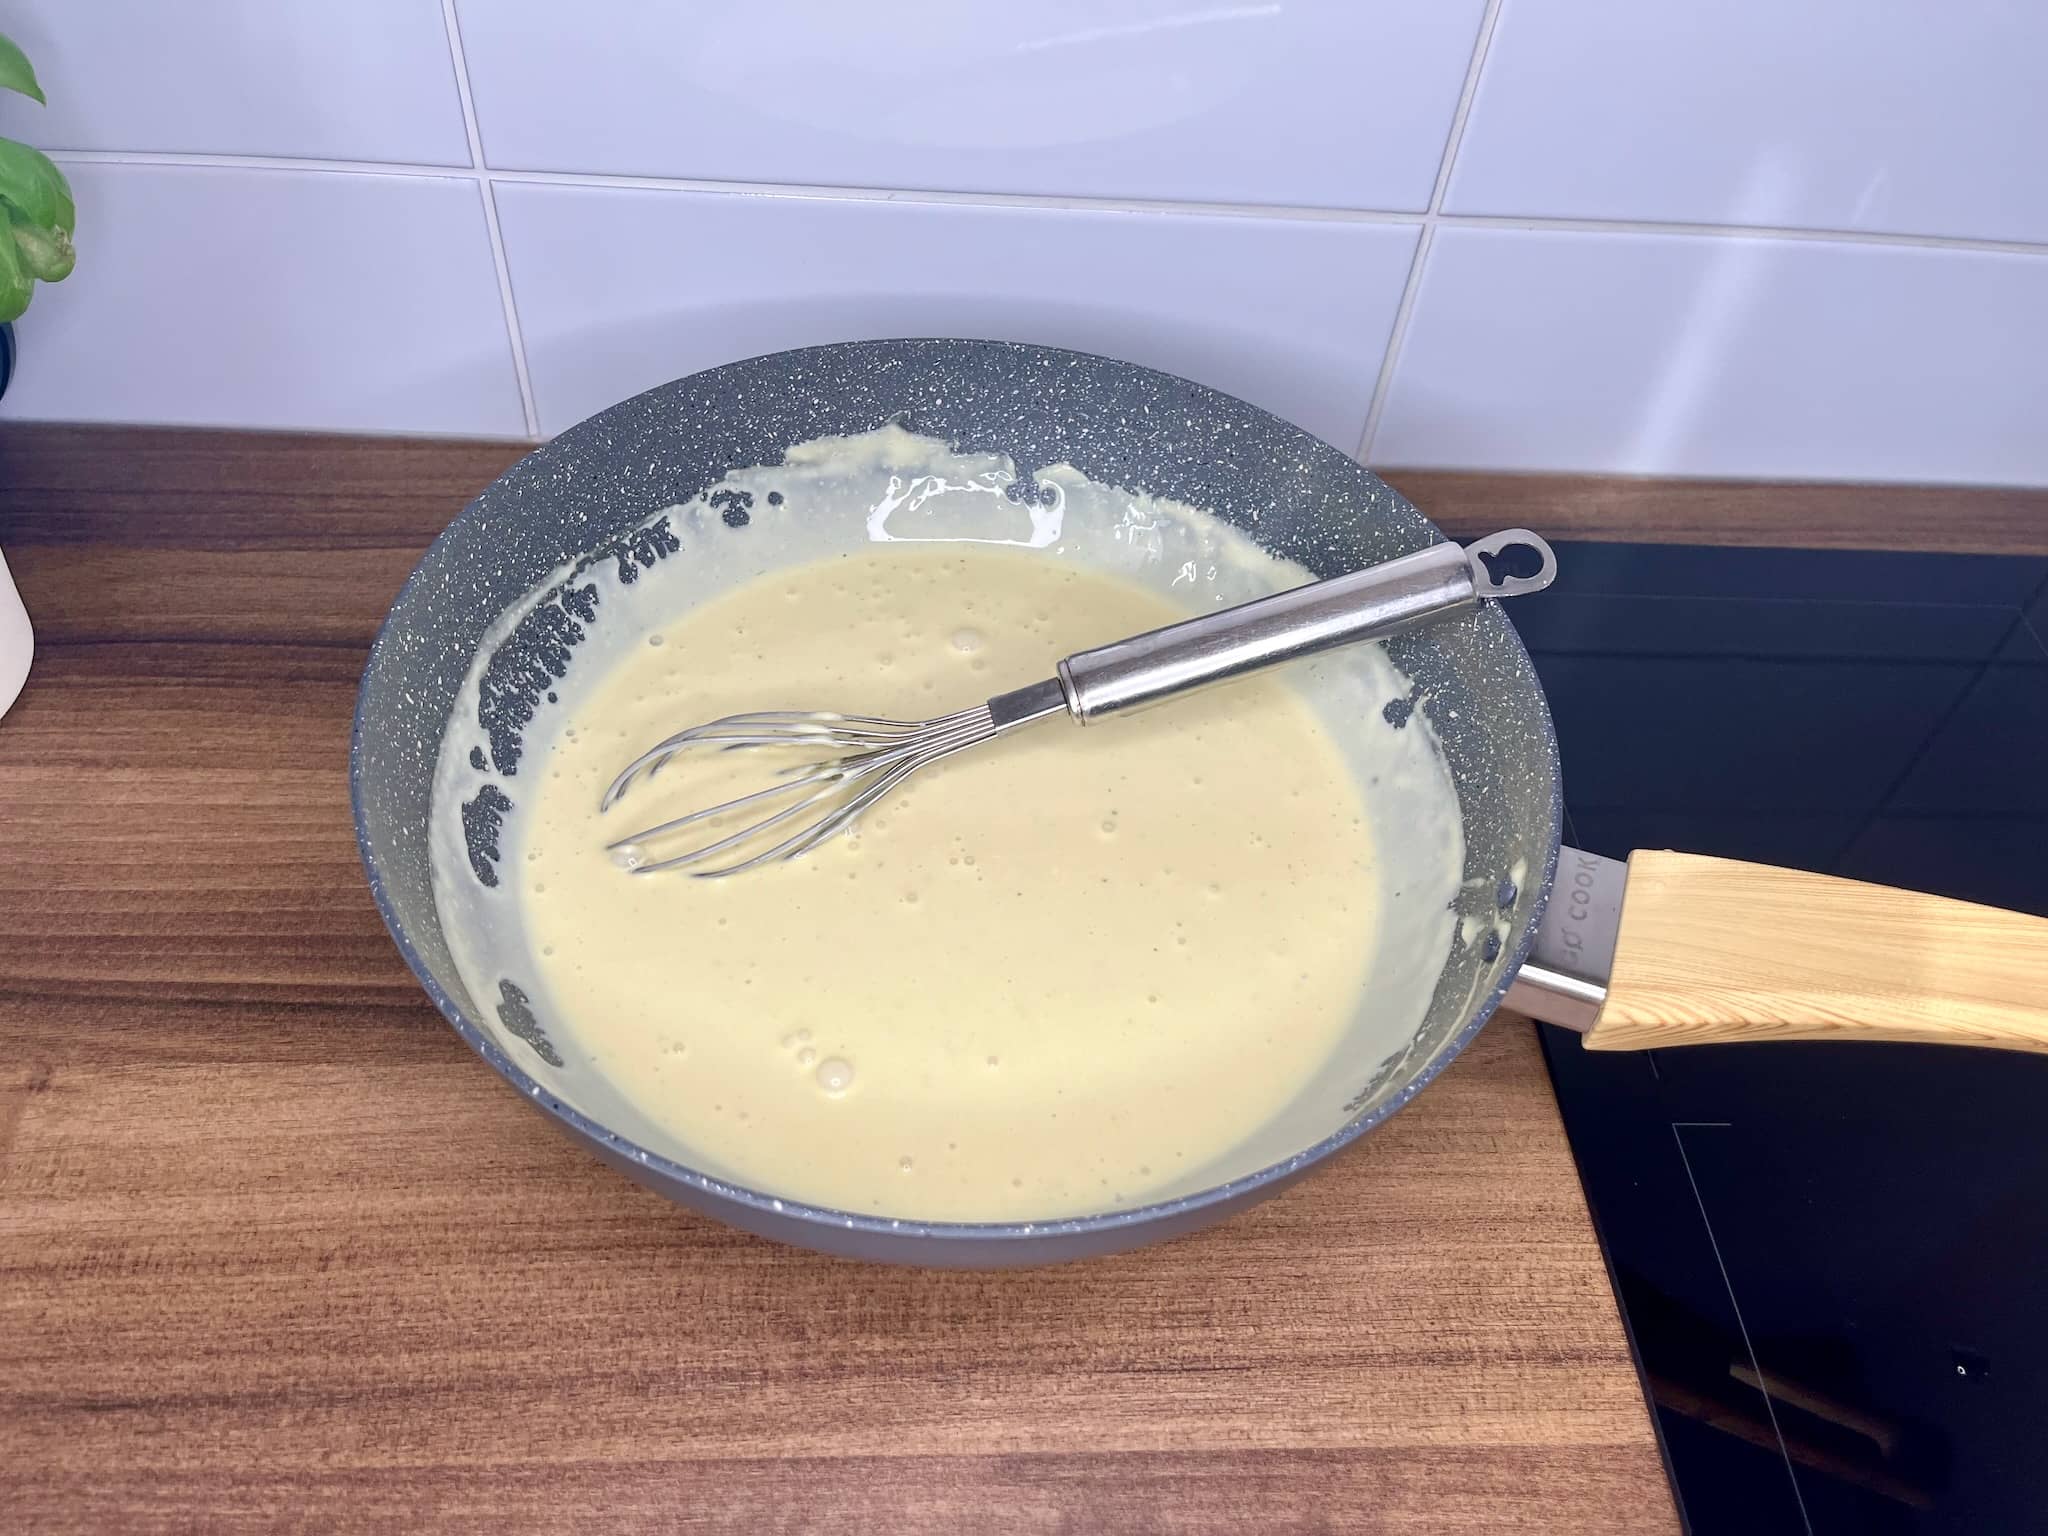 The prepared sauce is still in the pan